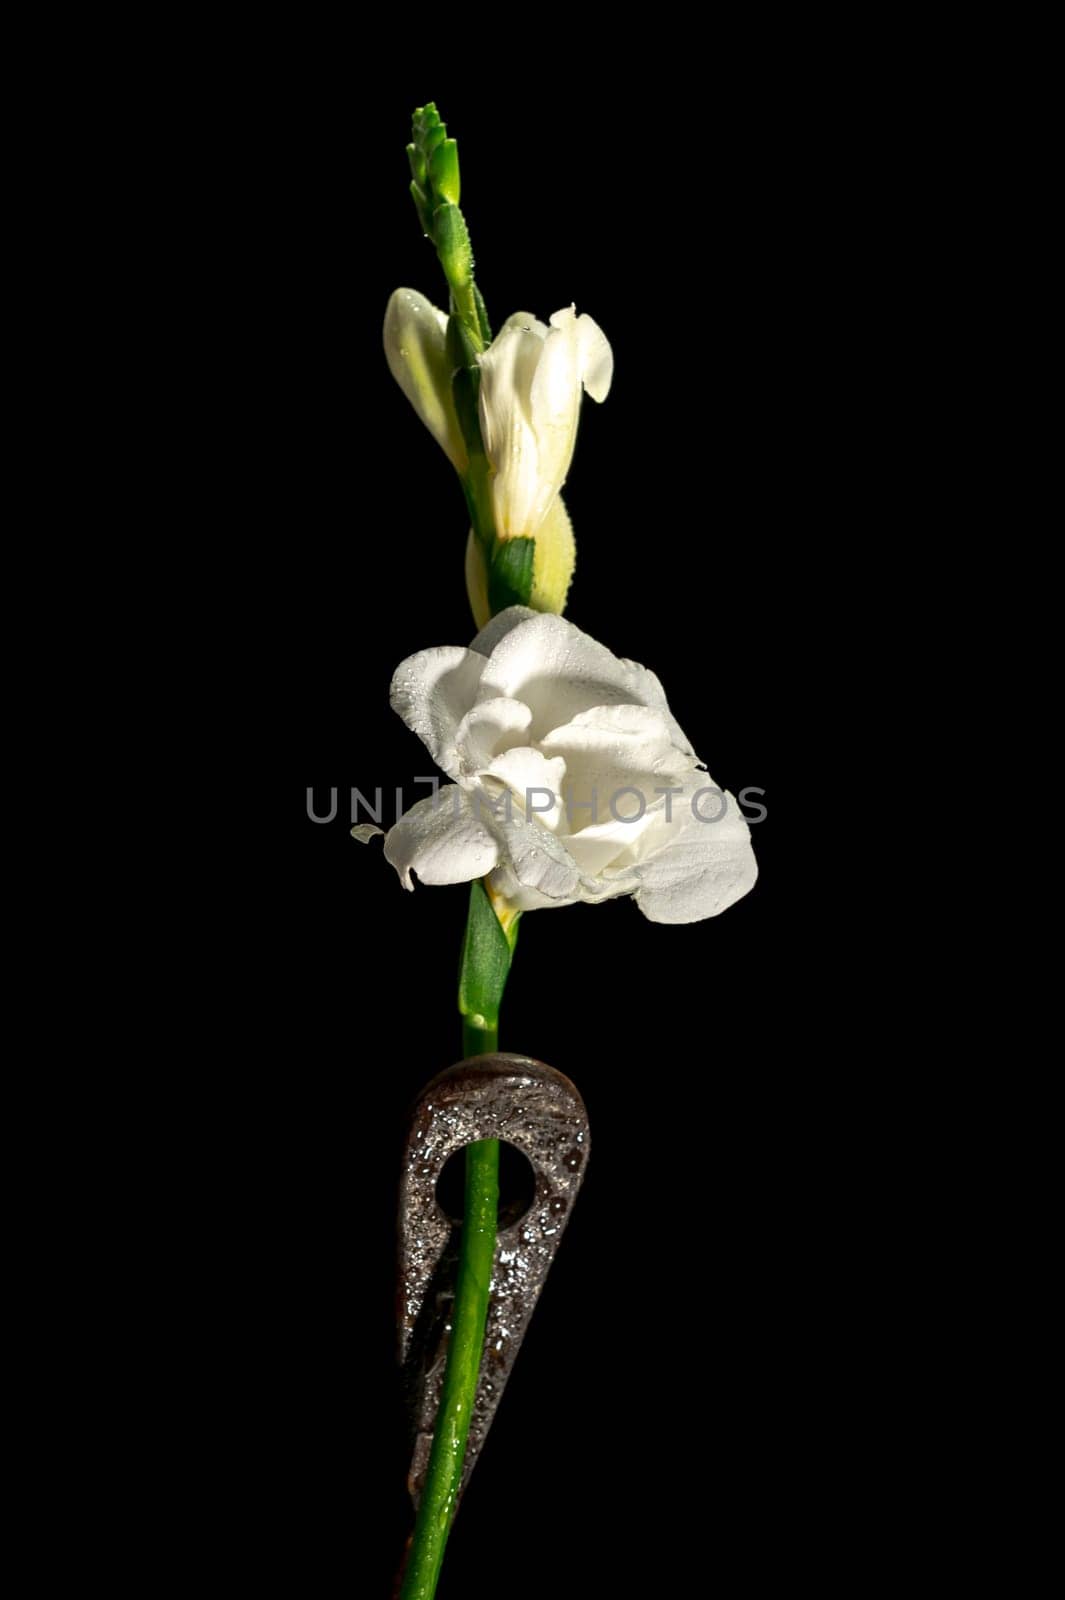 Creative still life with old rusty metal tool and white freesia flower on a black background